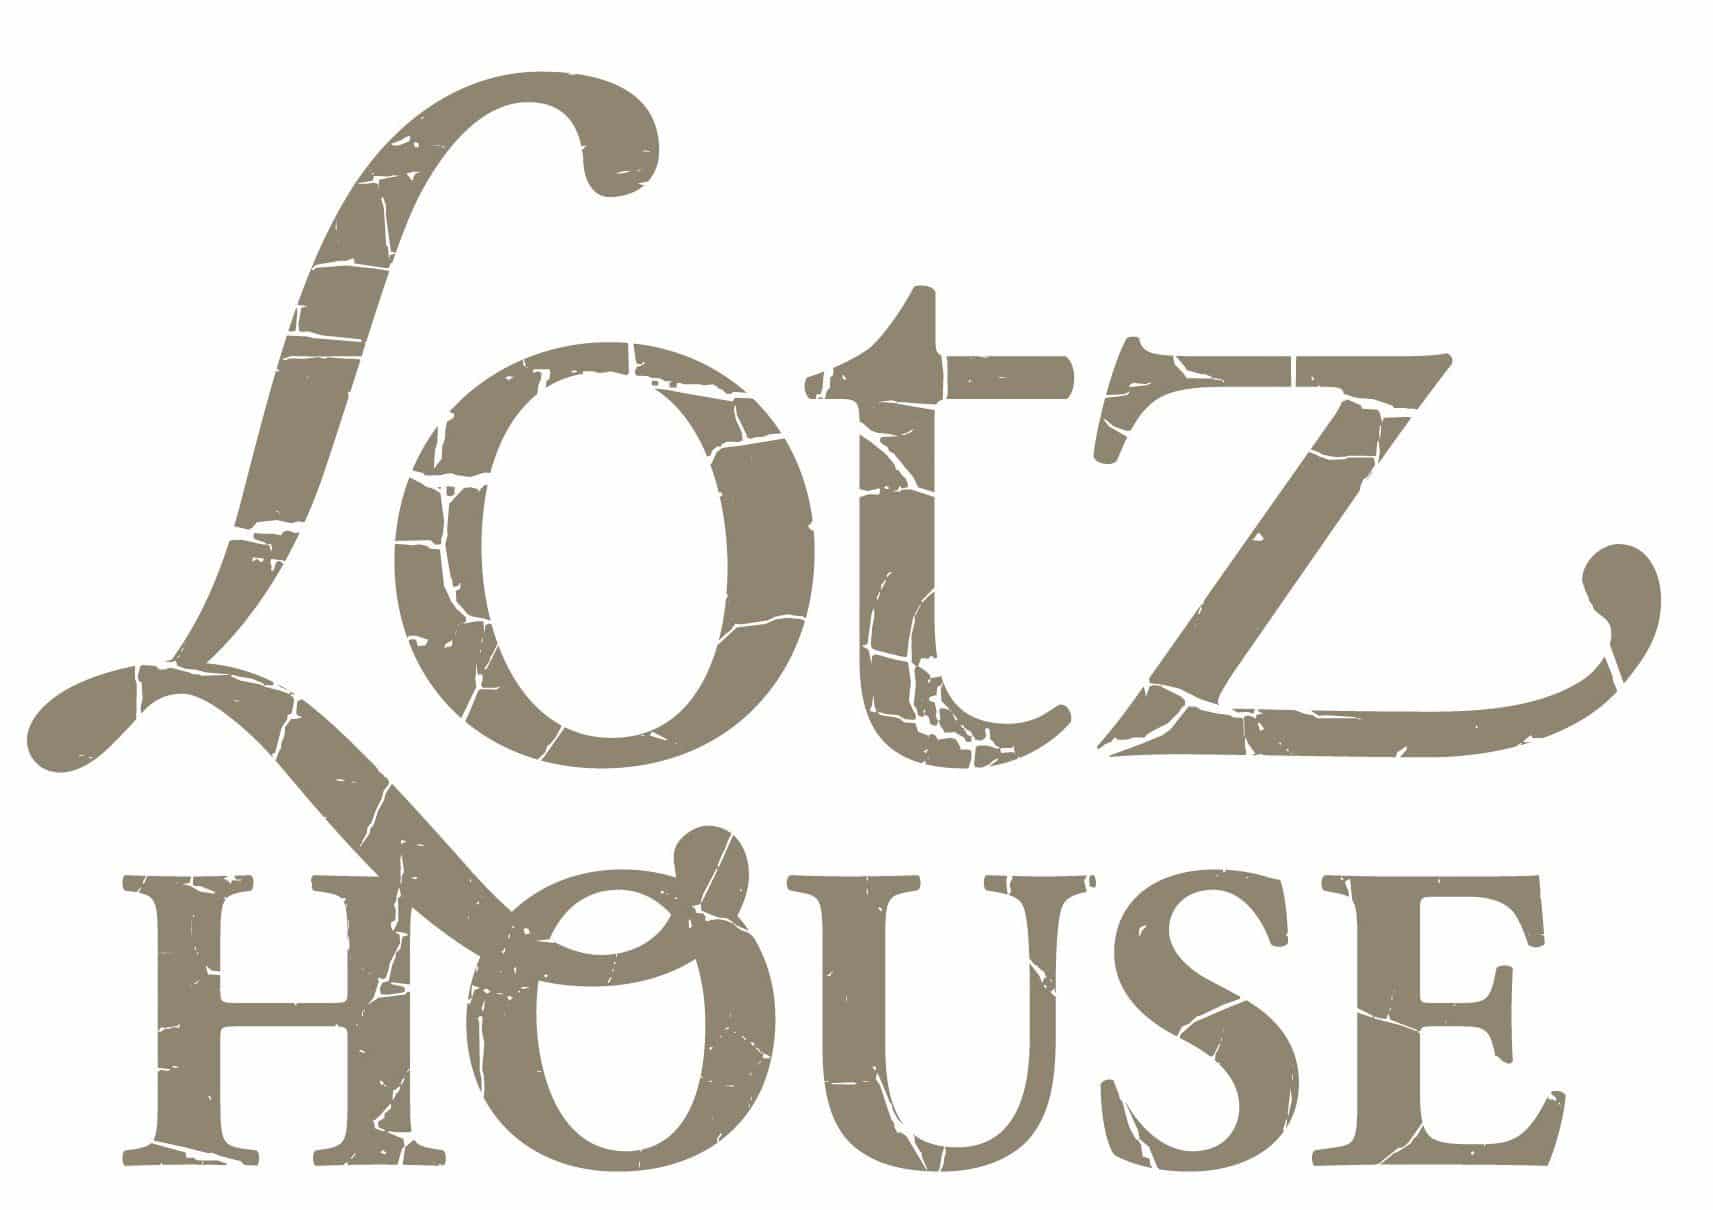 Logo for Lotz House, rated number one Franklin, TN attraction, the house, which has been on the National Historic Register since 1976 is located in the heart of downtown historic Franklin, Tennessee at “ground zero” of the Battle of Franklin which was a pivotal battle in the American Civil War.